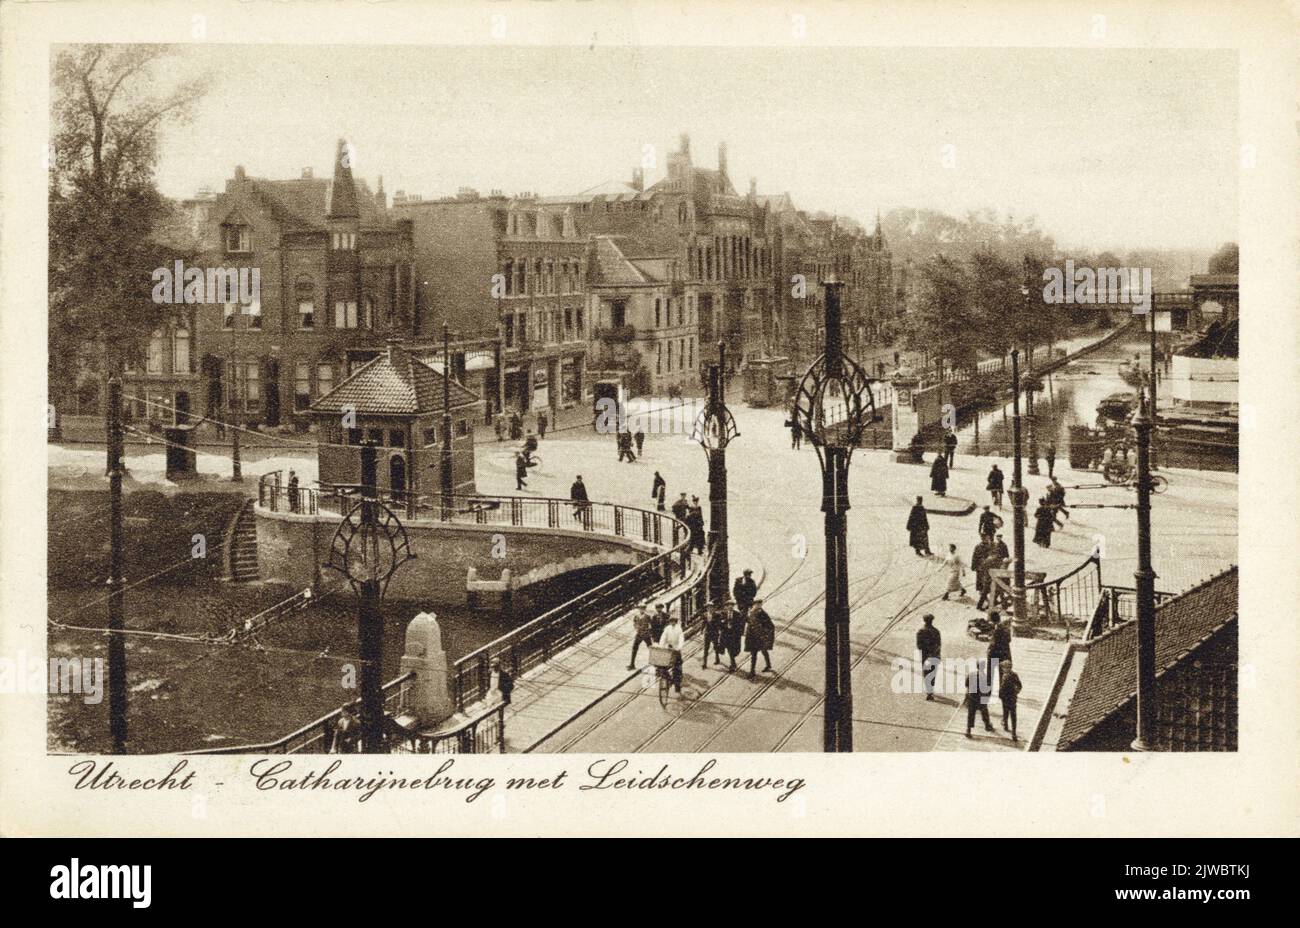 View on a part of the Catharijnebrug over the Stadsbuitengracht in Utrecht with the entrance to the Leidseweg in the middle. Stock Photo